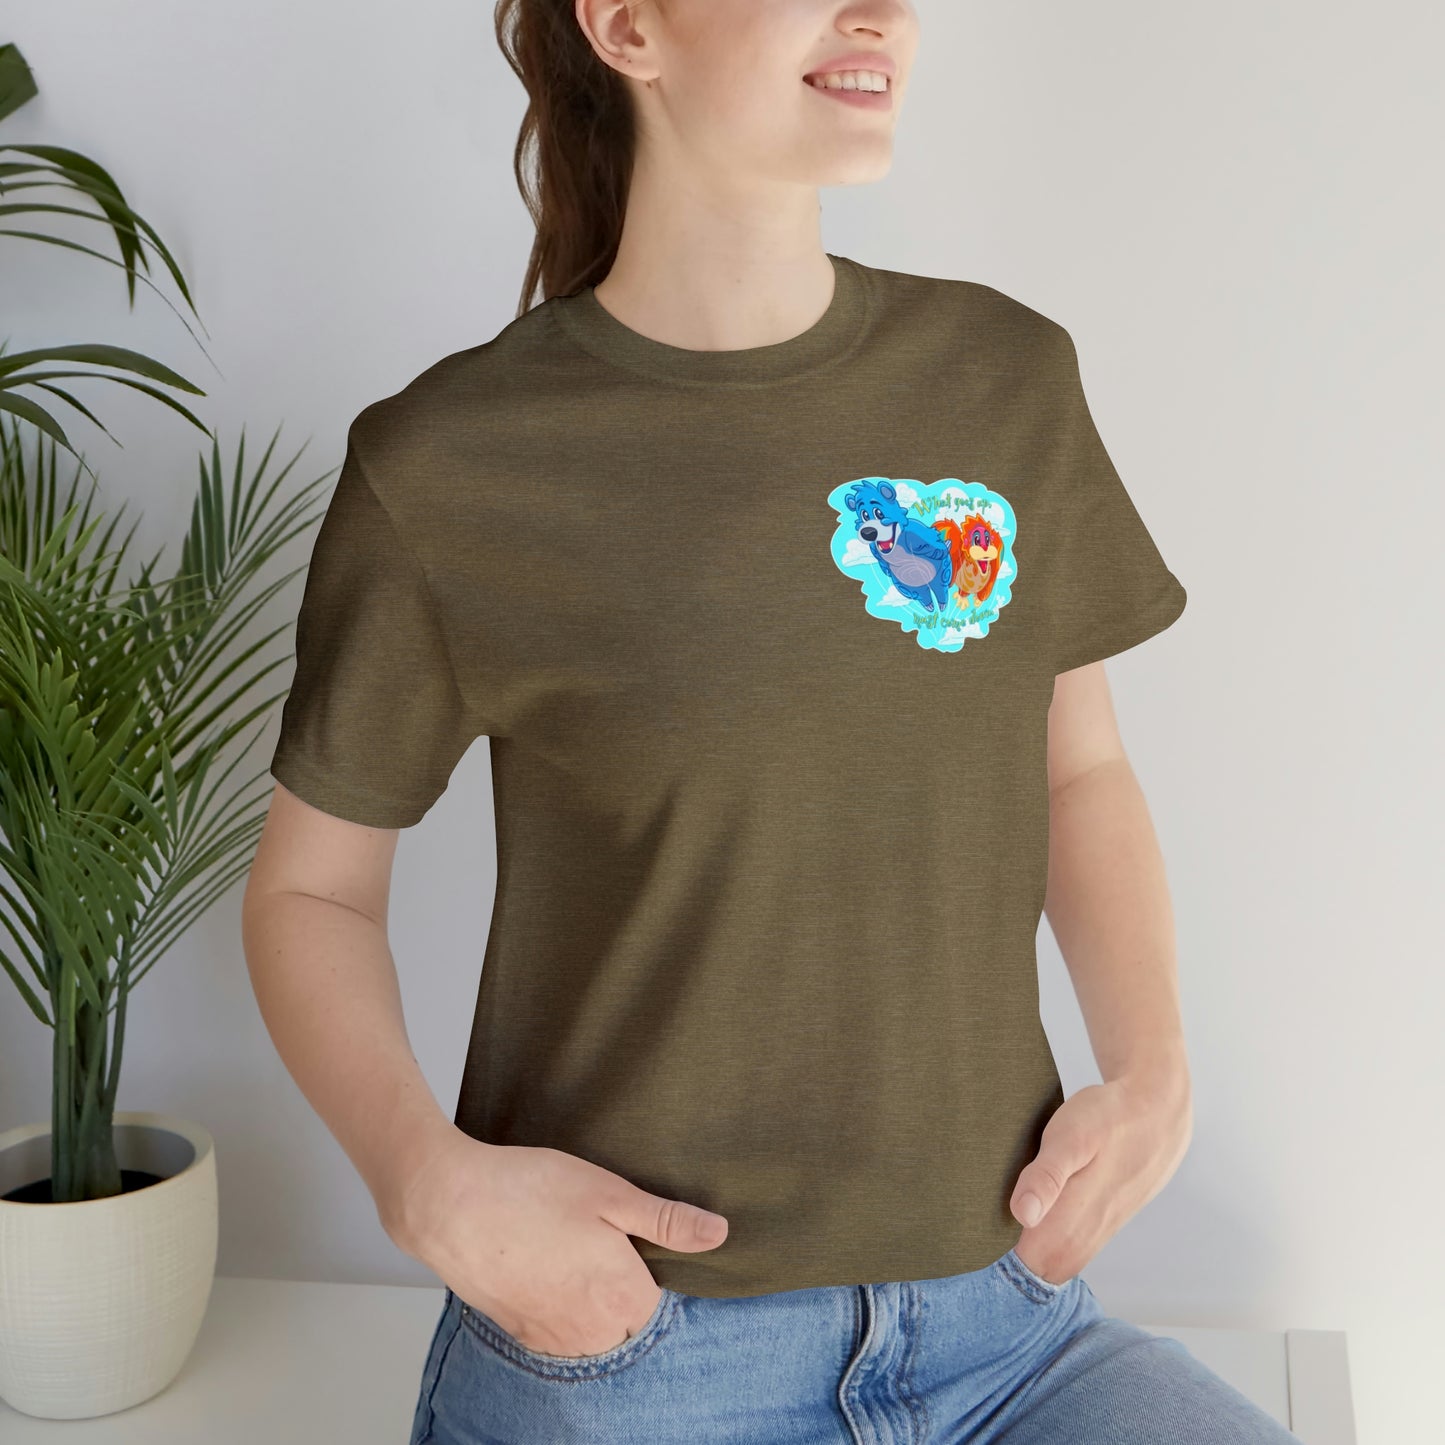 Baloo and louie kite tails t shirt